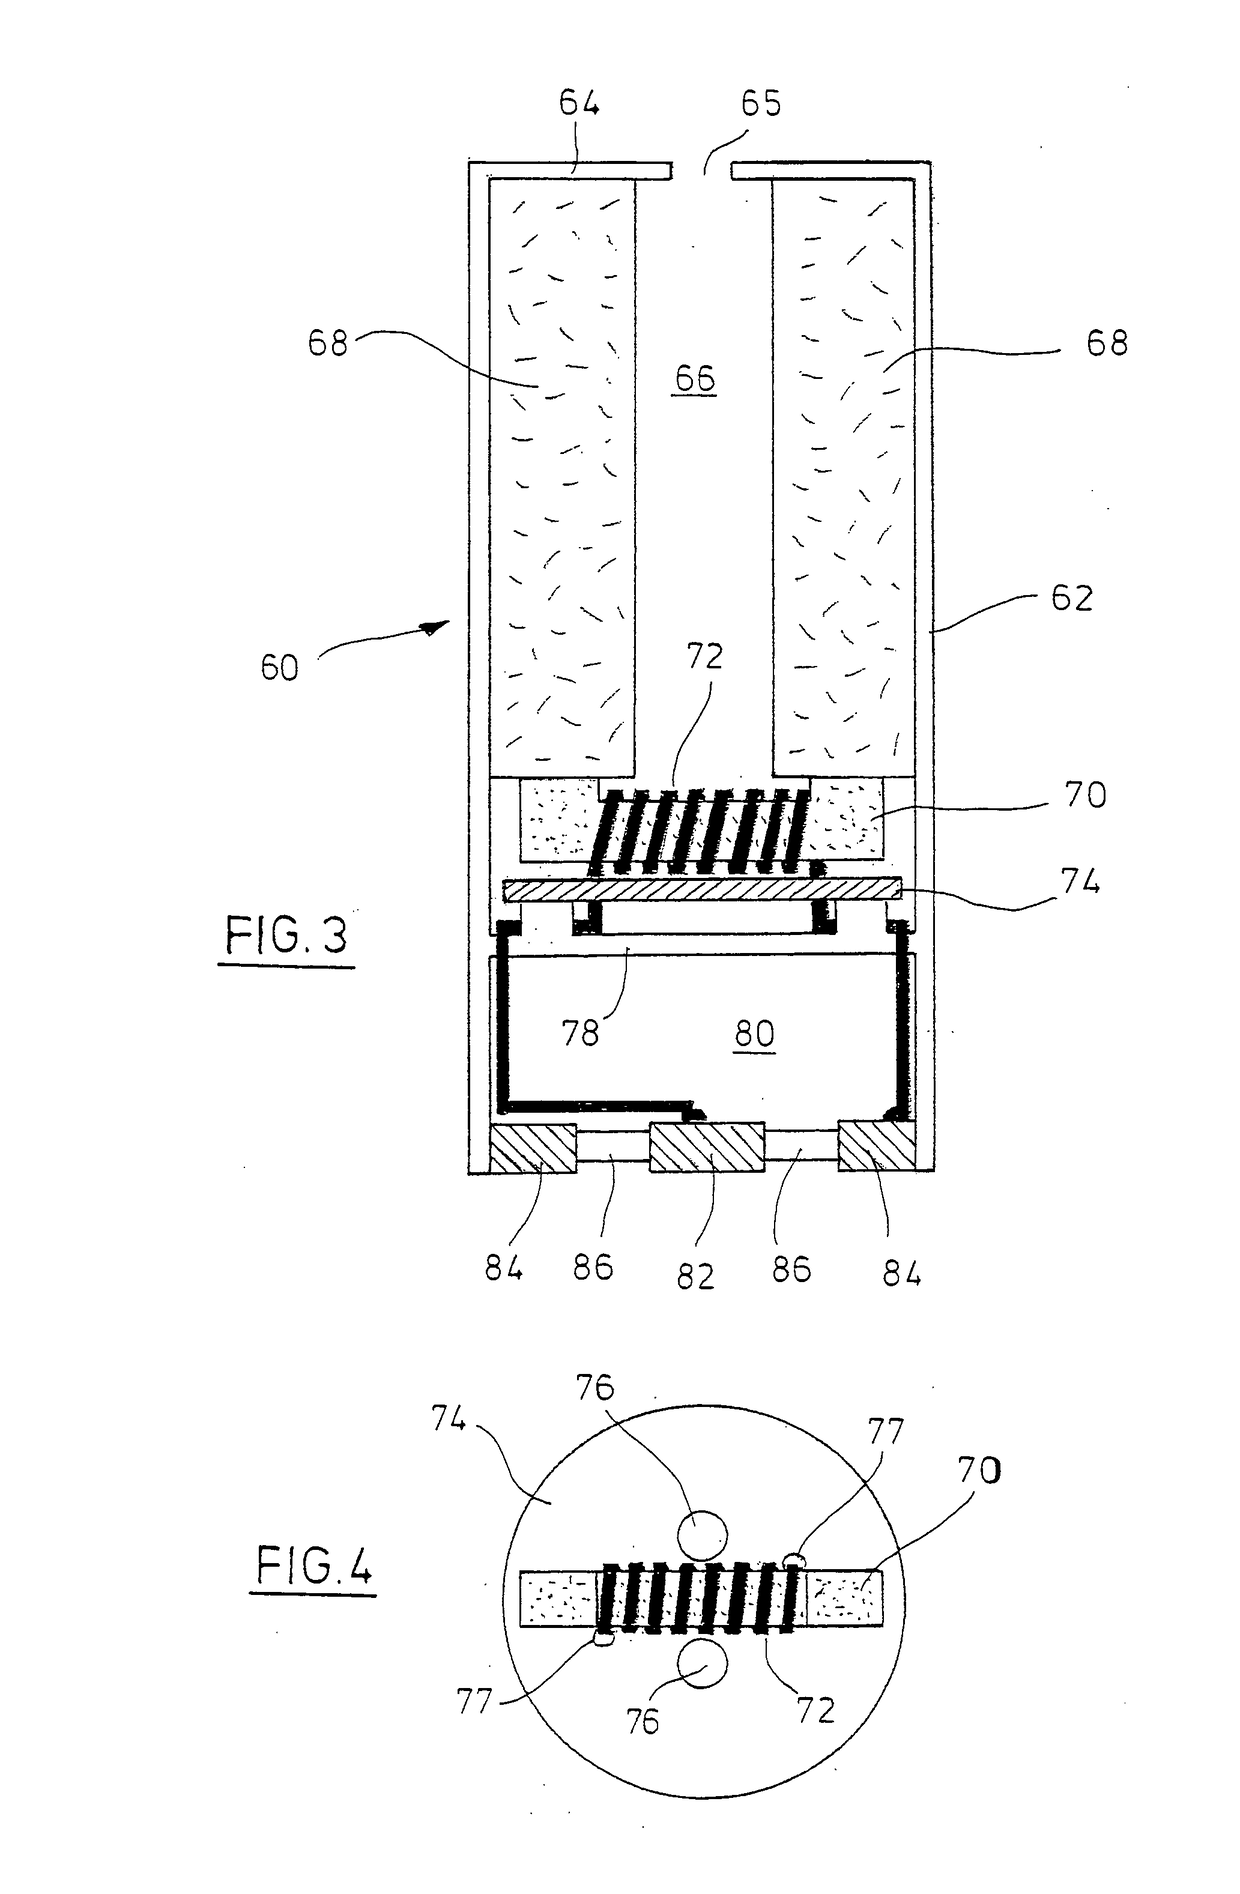 Electronic smoking device and capsule system